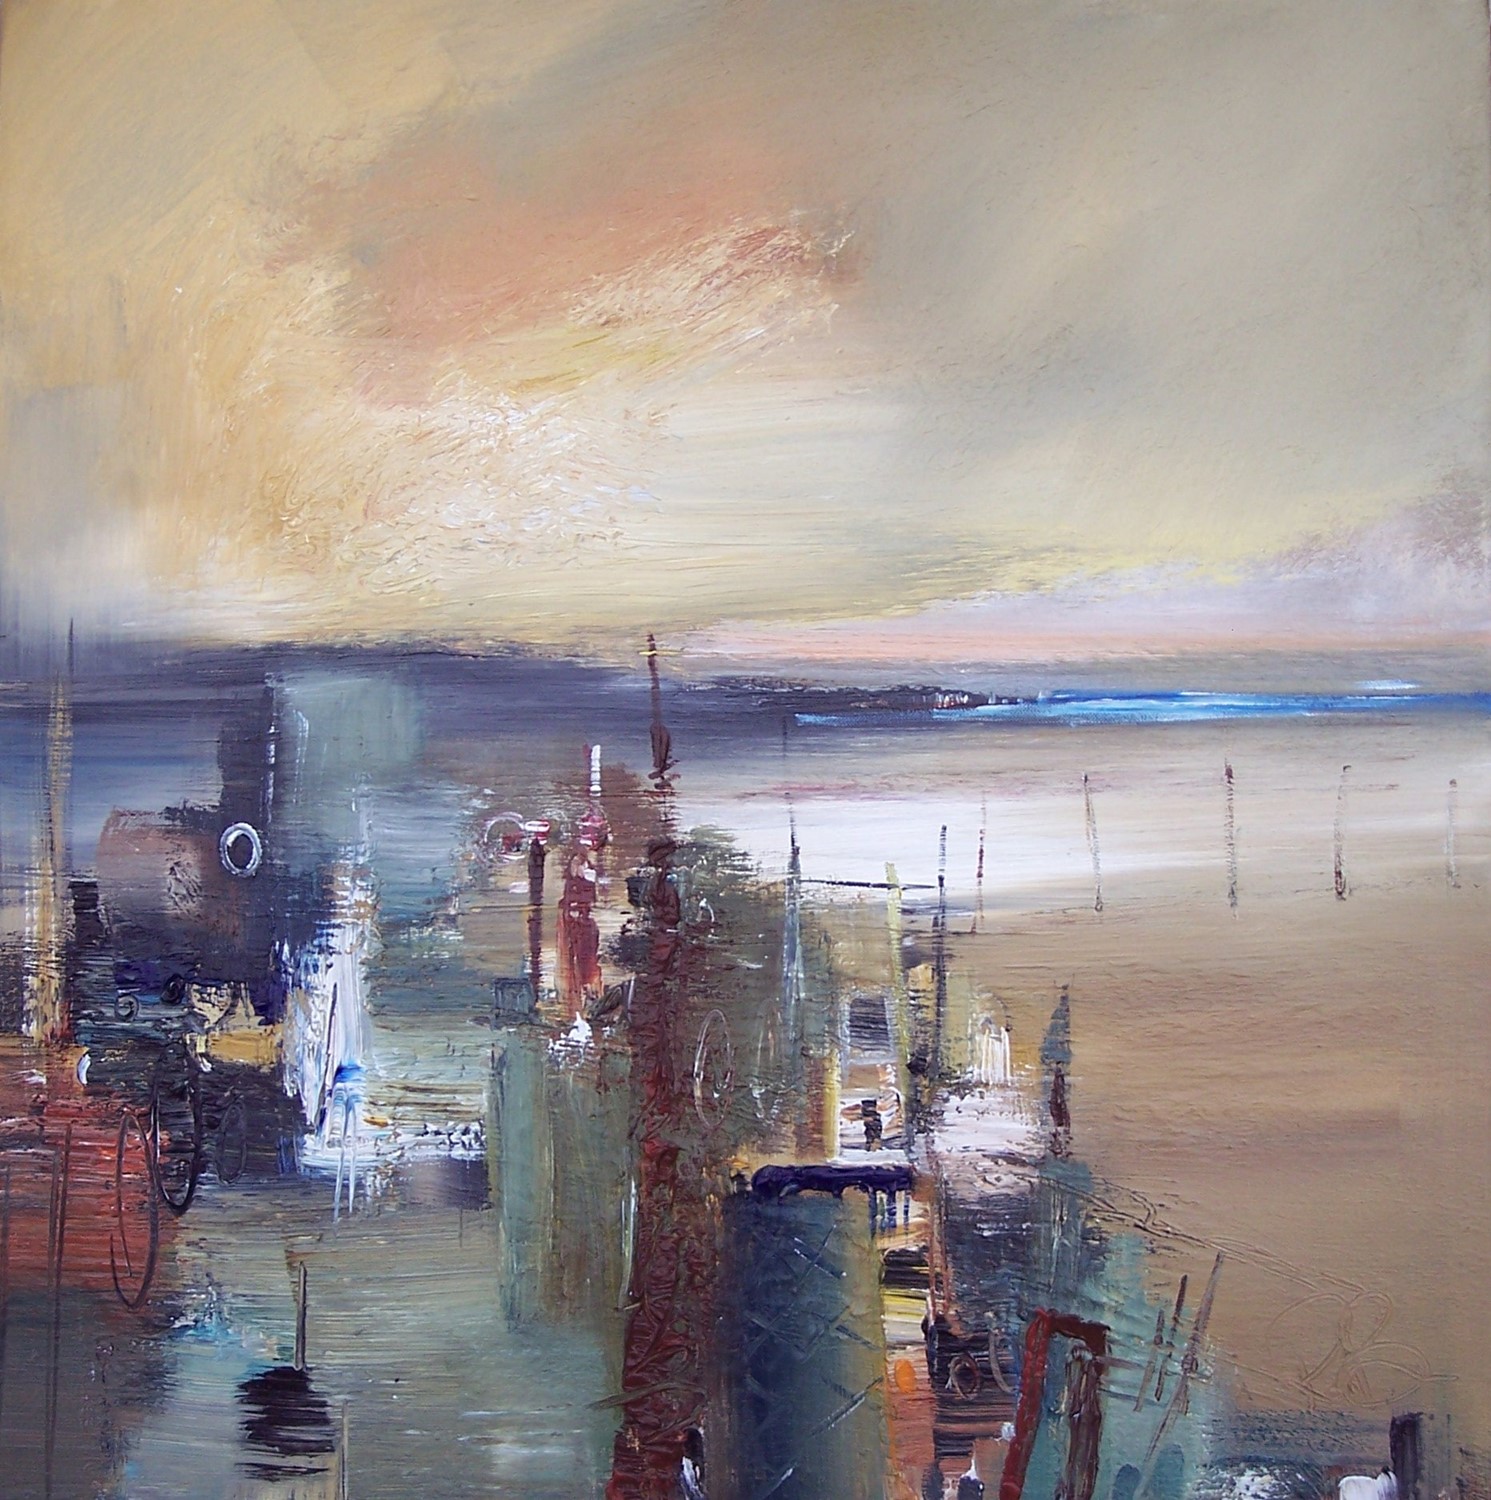 'Waiting at the Quay' by artist Rosanne Barr